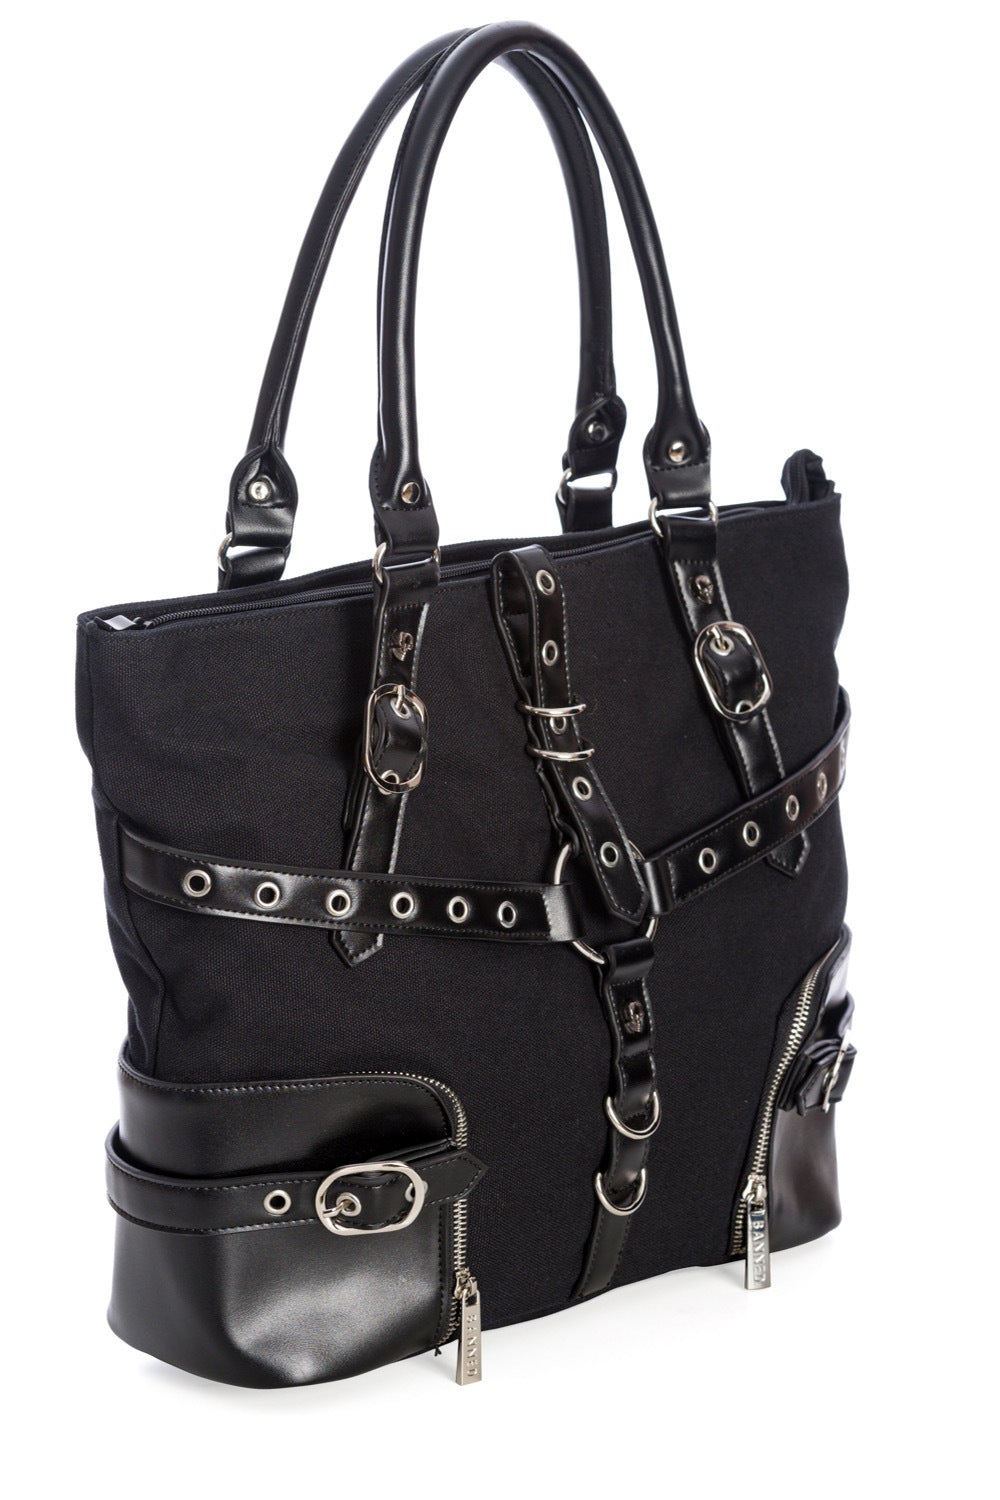 Black tote back with faux leather strap details